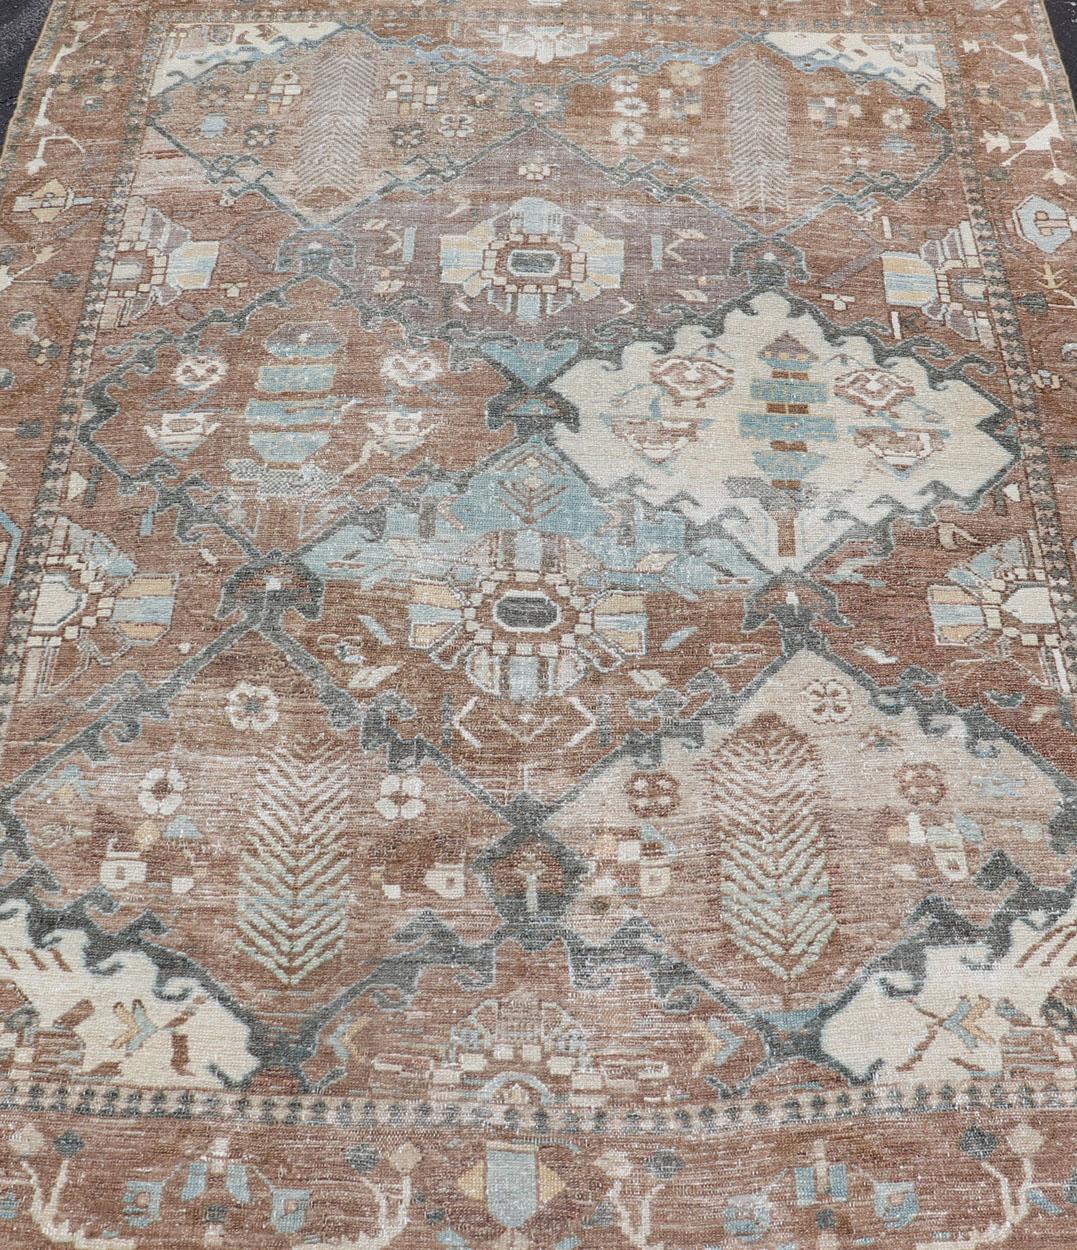 20th Century Antique Persian Bakhitari Rug with All-Over Patten in Earthy and Brown Tones